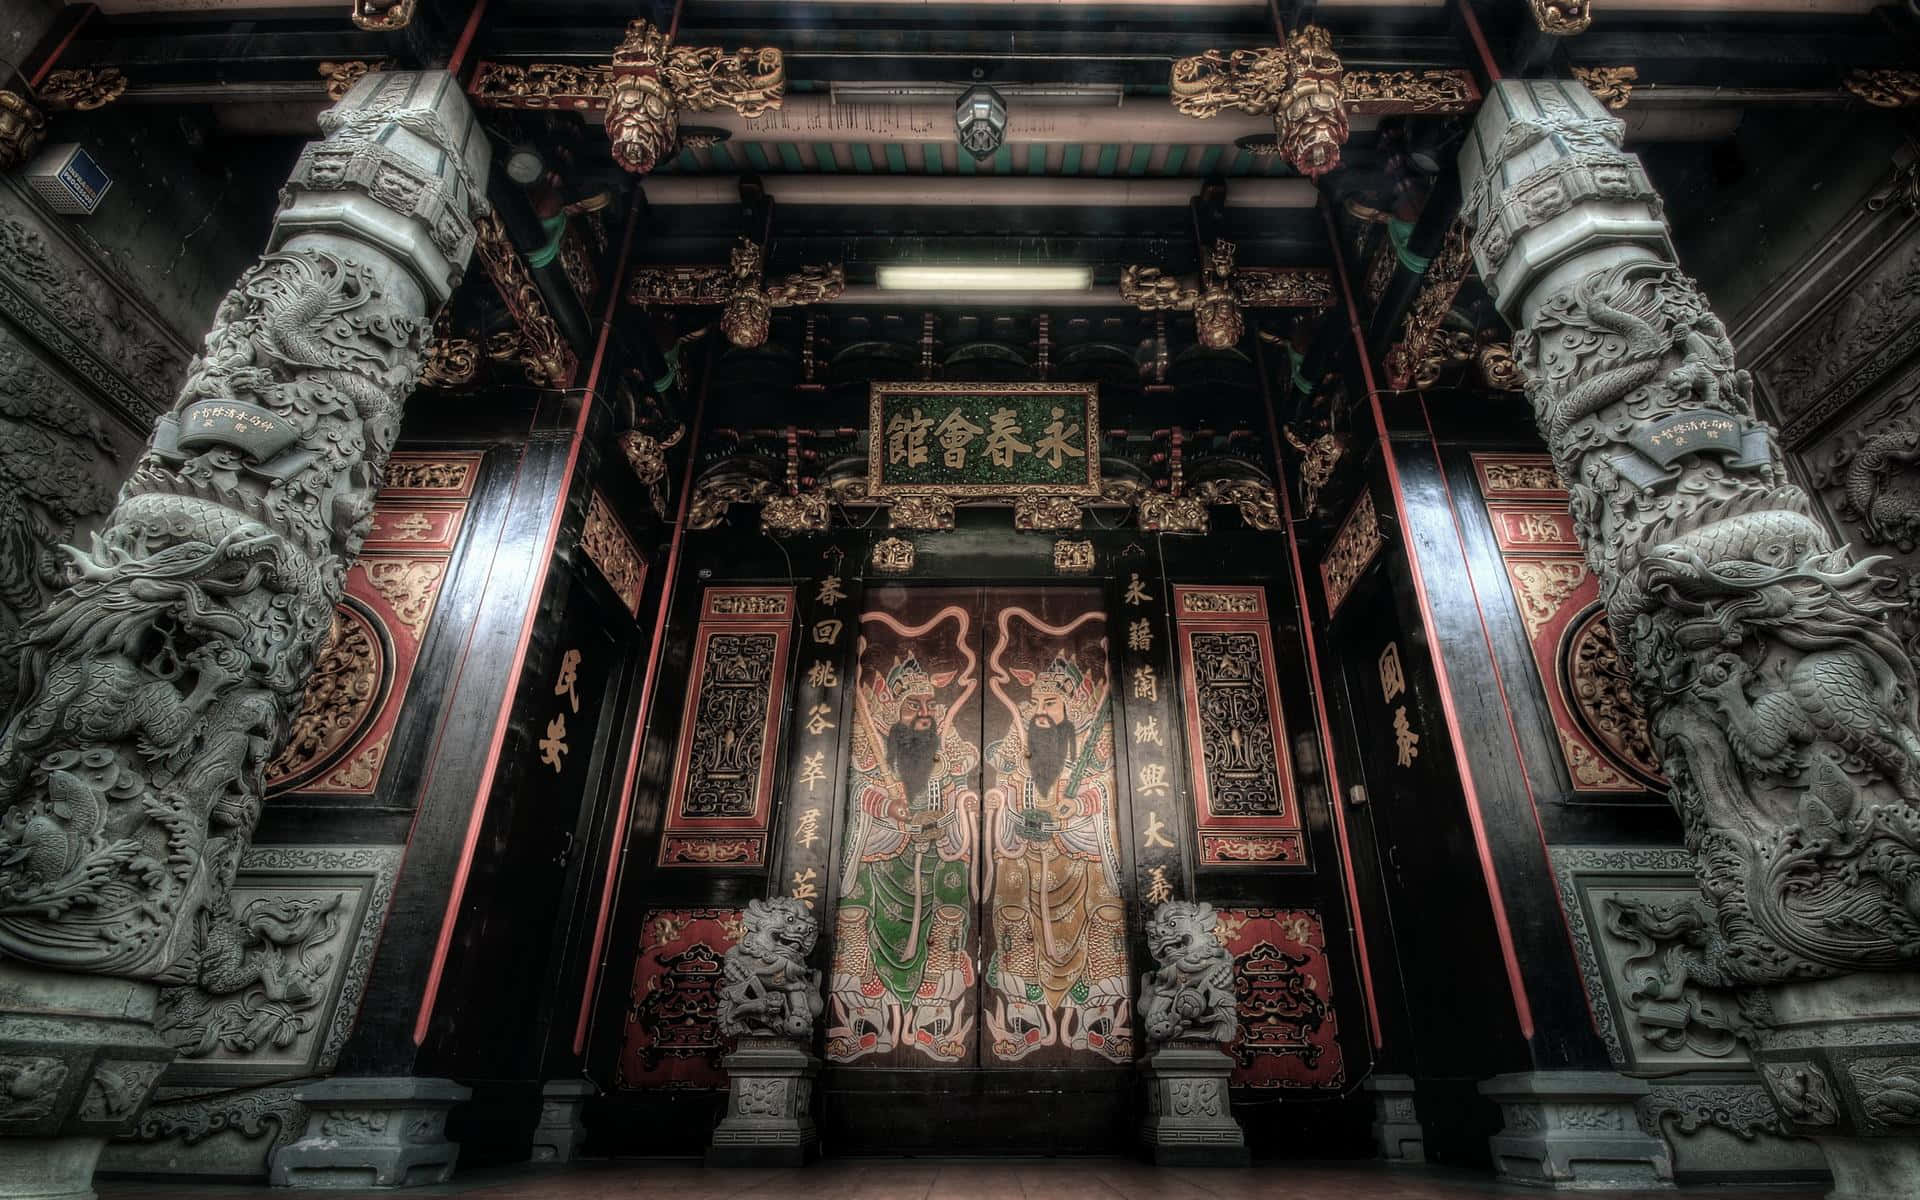 The beauty of ancient temple architecture